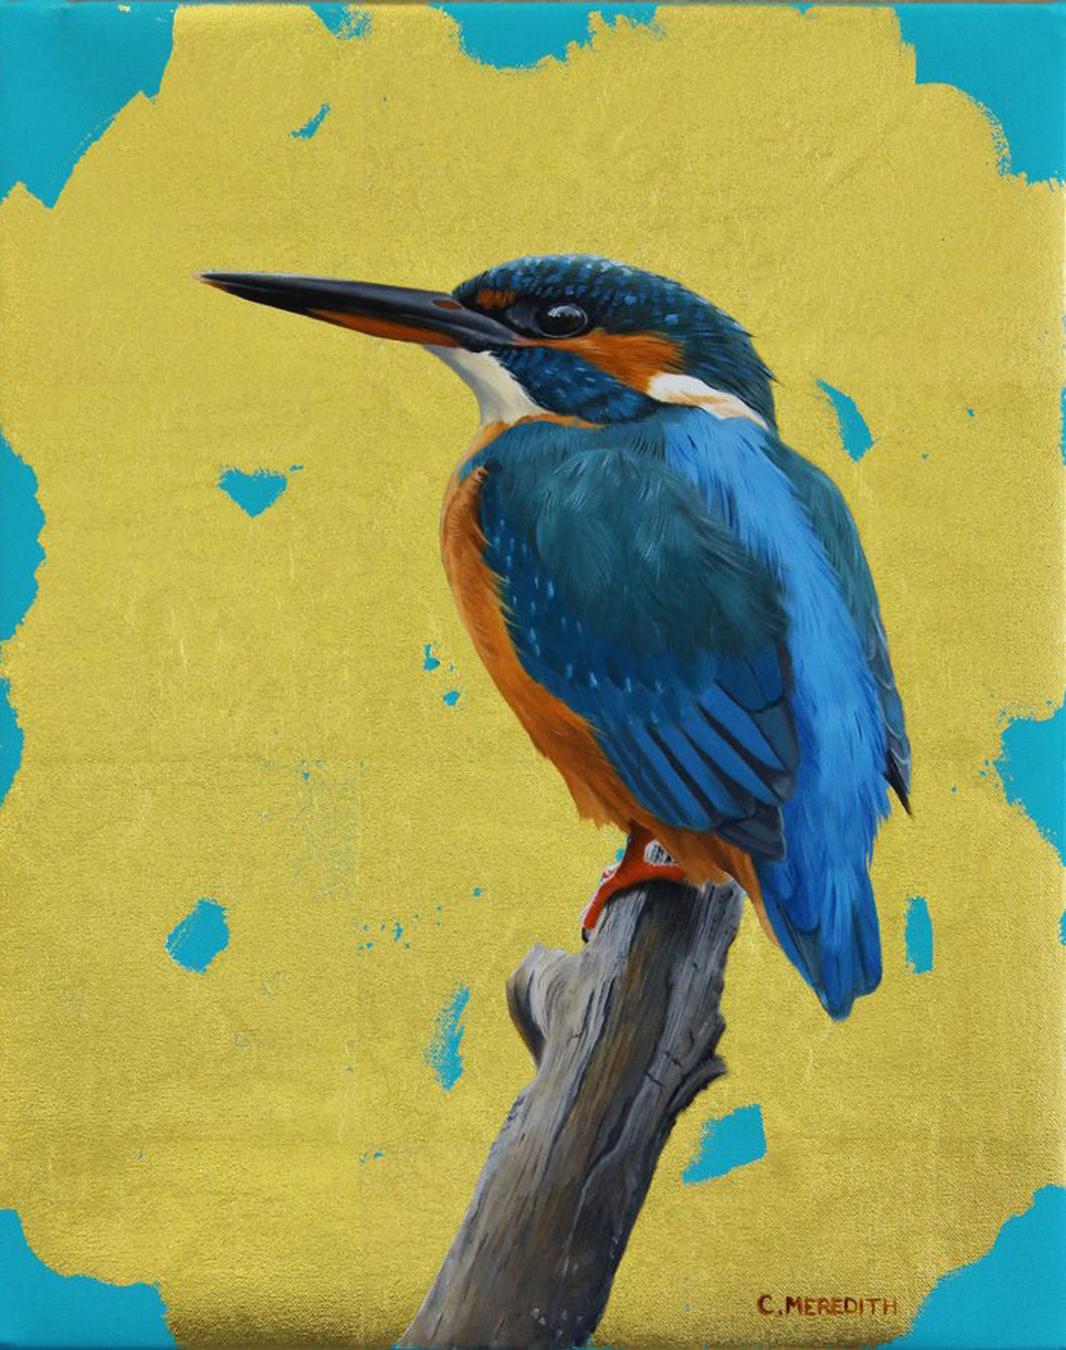 Clive Meredith Animal Painting - Waterside Jewel